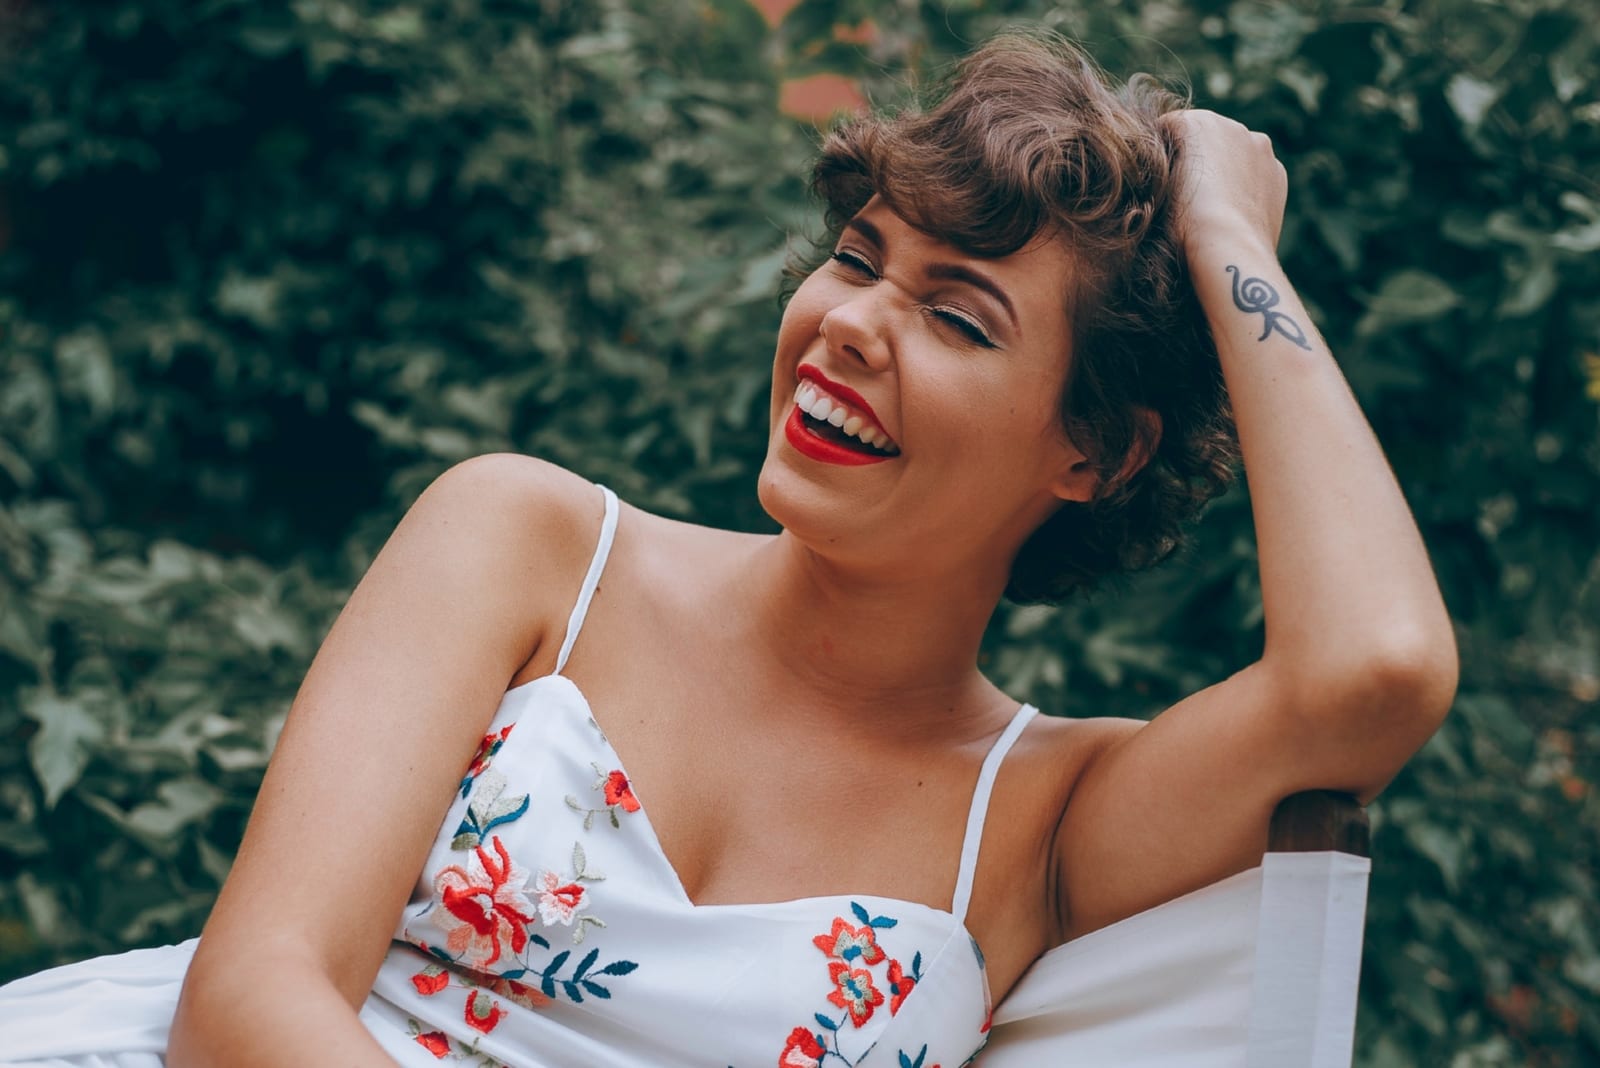 woman with red lipstick laughing while sitting on chair outdoor